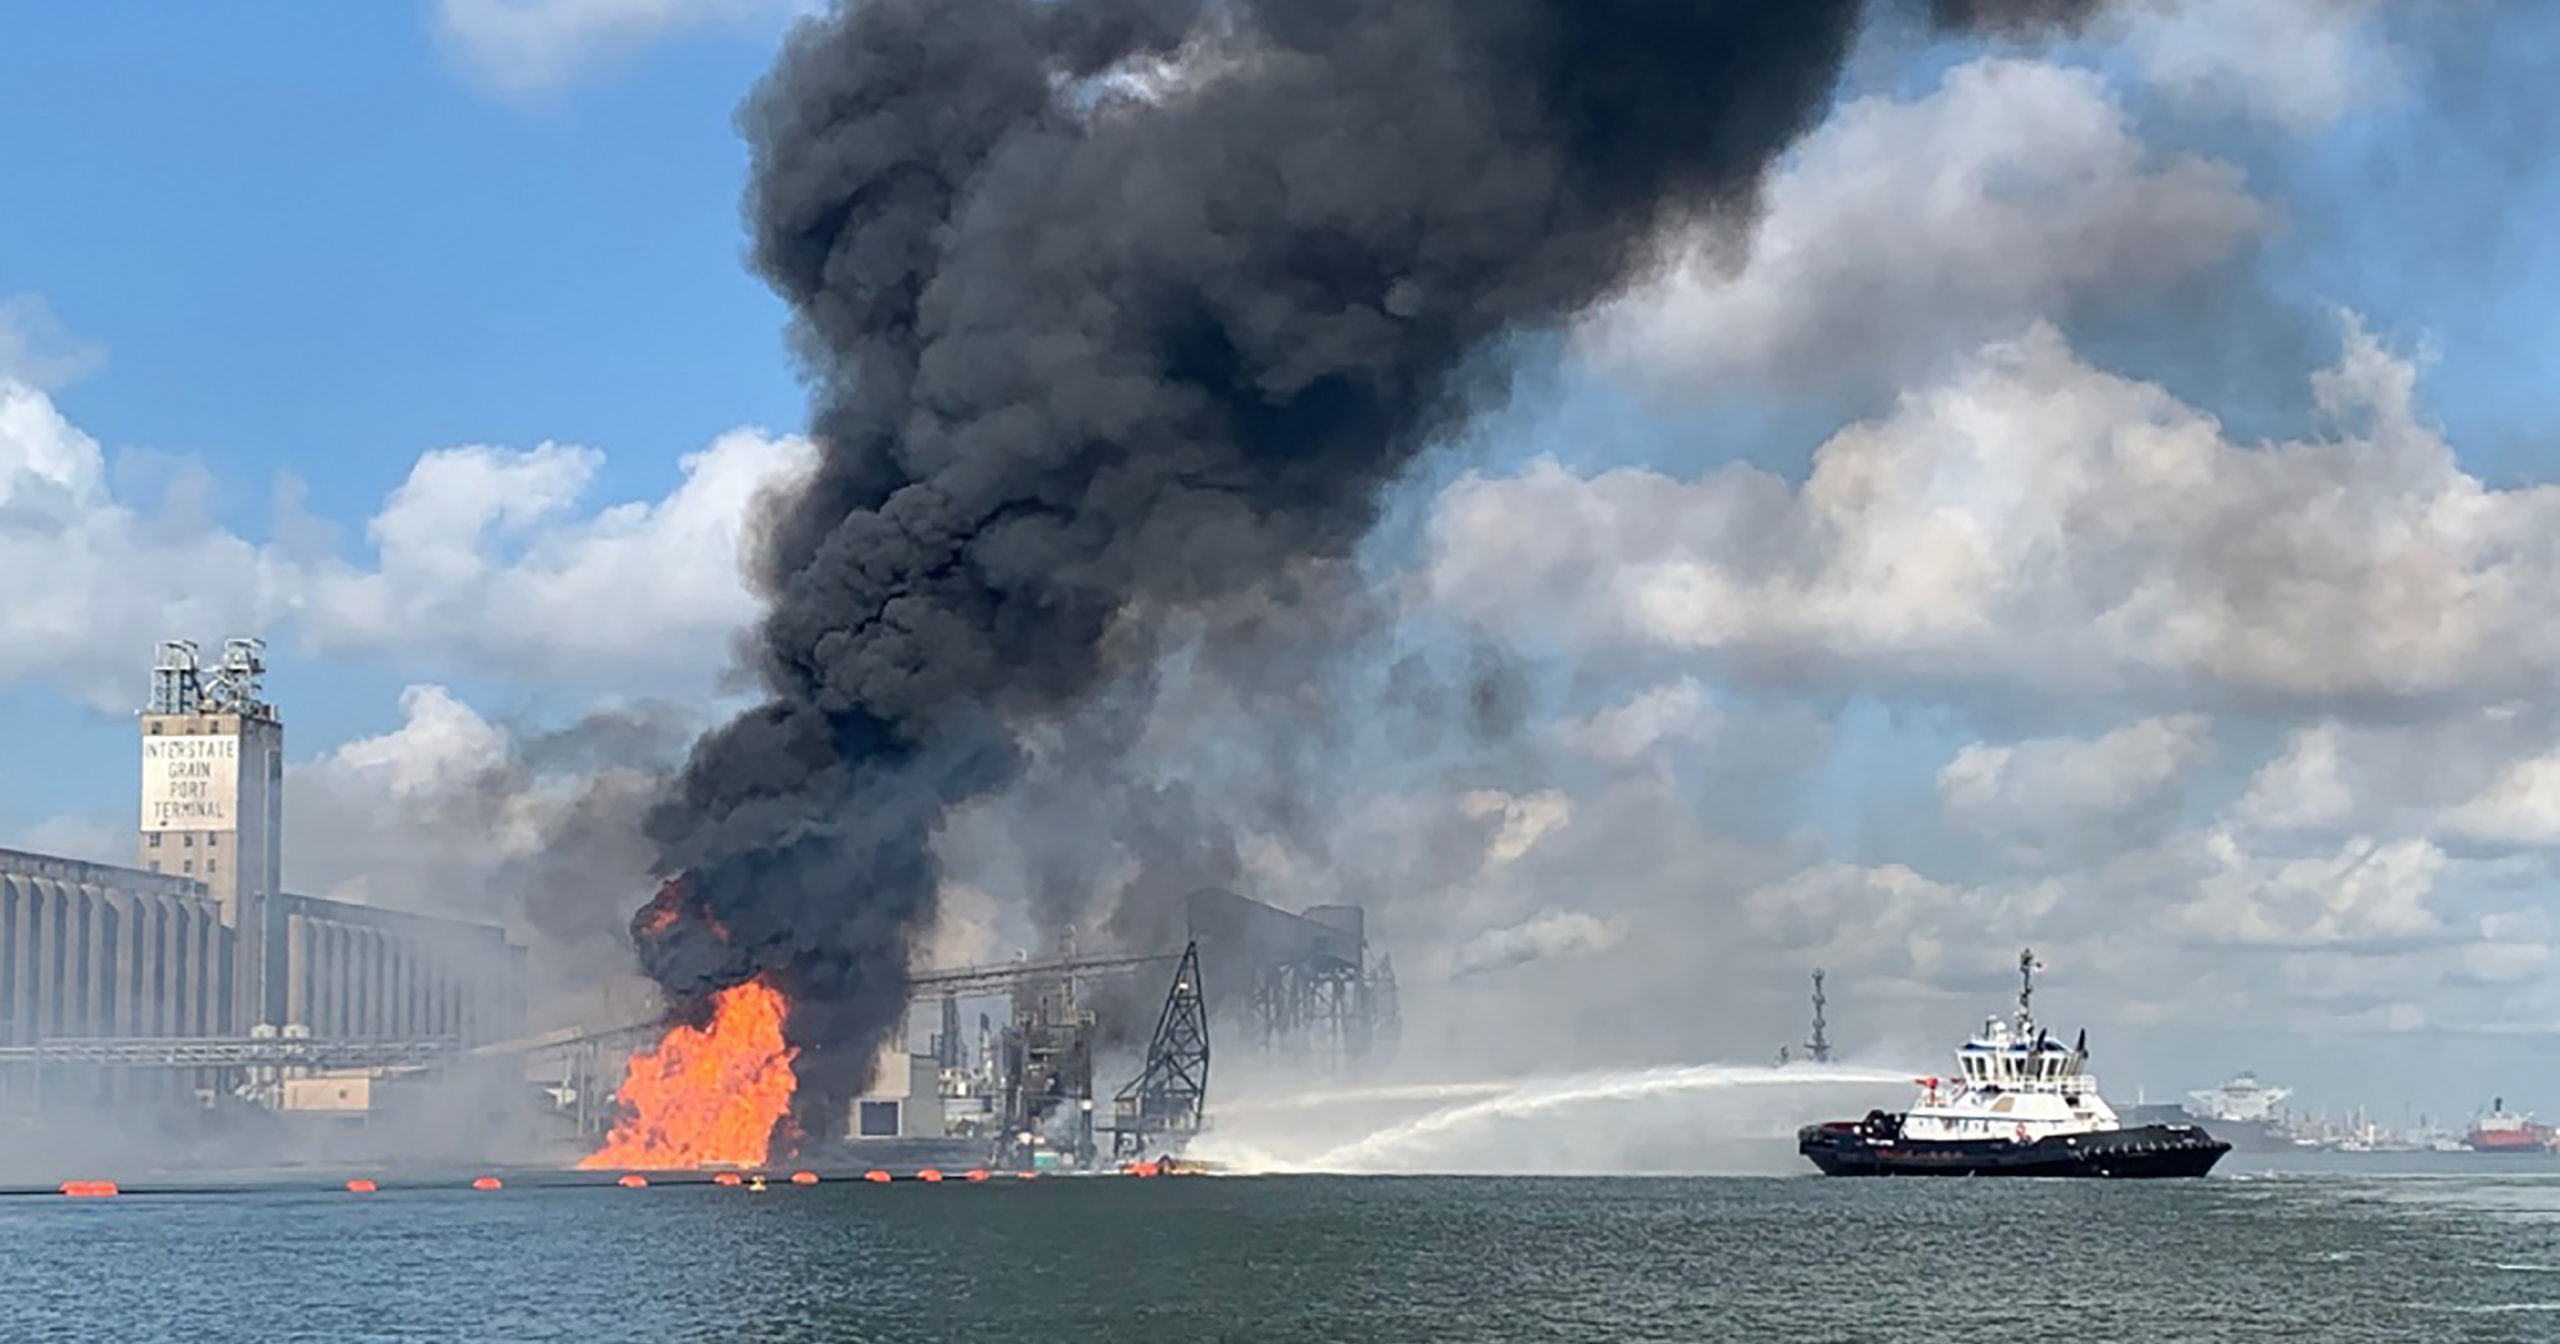 In this photo released by the U.S. Coast Guard, Coast Guard crews respond to a fire in the Port of Corpus Christi on Aug. 21, 2020, in Corpus Christi, Texas.